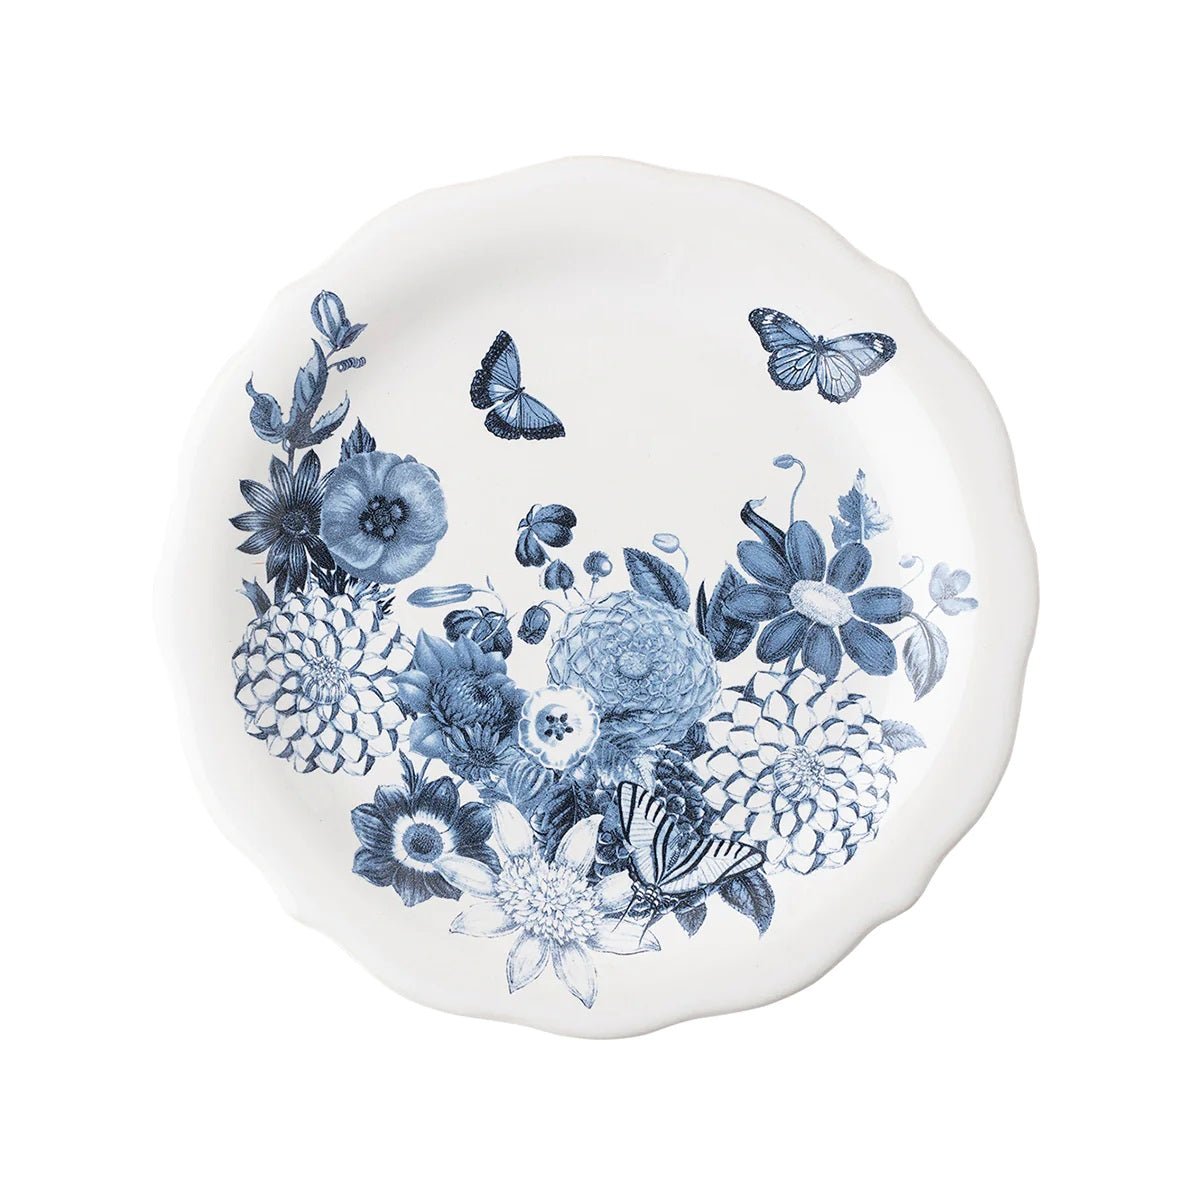 Field of Flowers Dessert/Salad Plate - Chambray - Gaines Jewelers